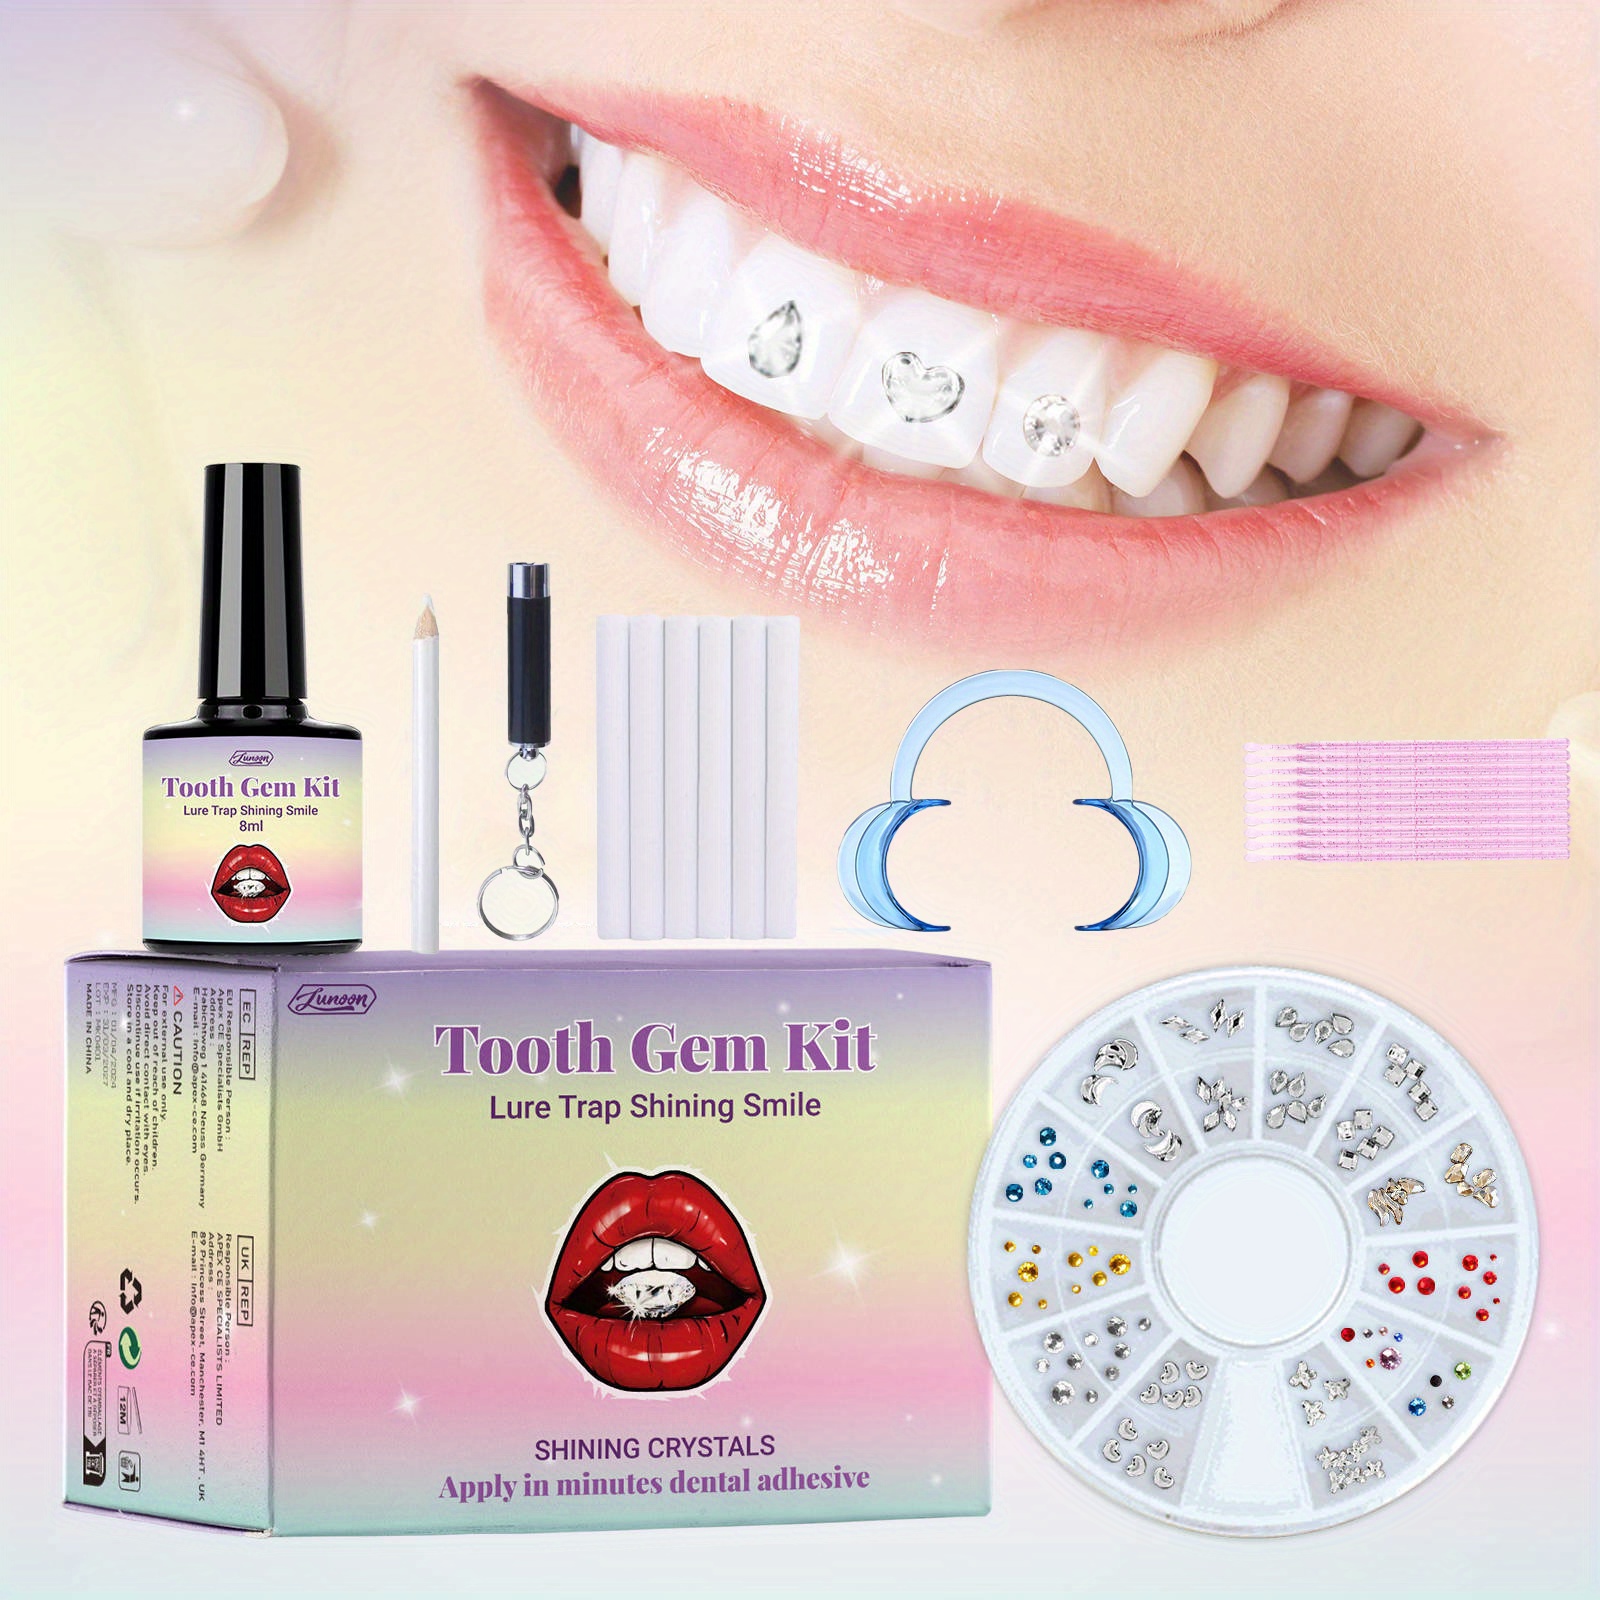 

21-piece Diy Tooth Gem Kit - Professional Fashion Teeth Jewelry Starter Set With Crystals & Tools, Odorless